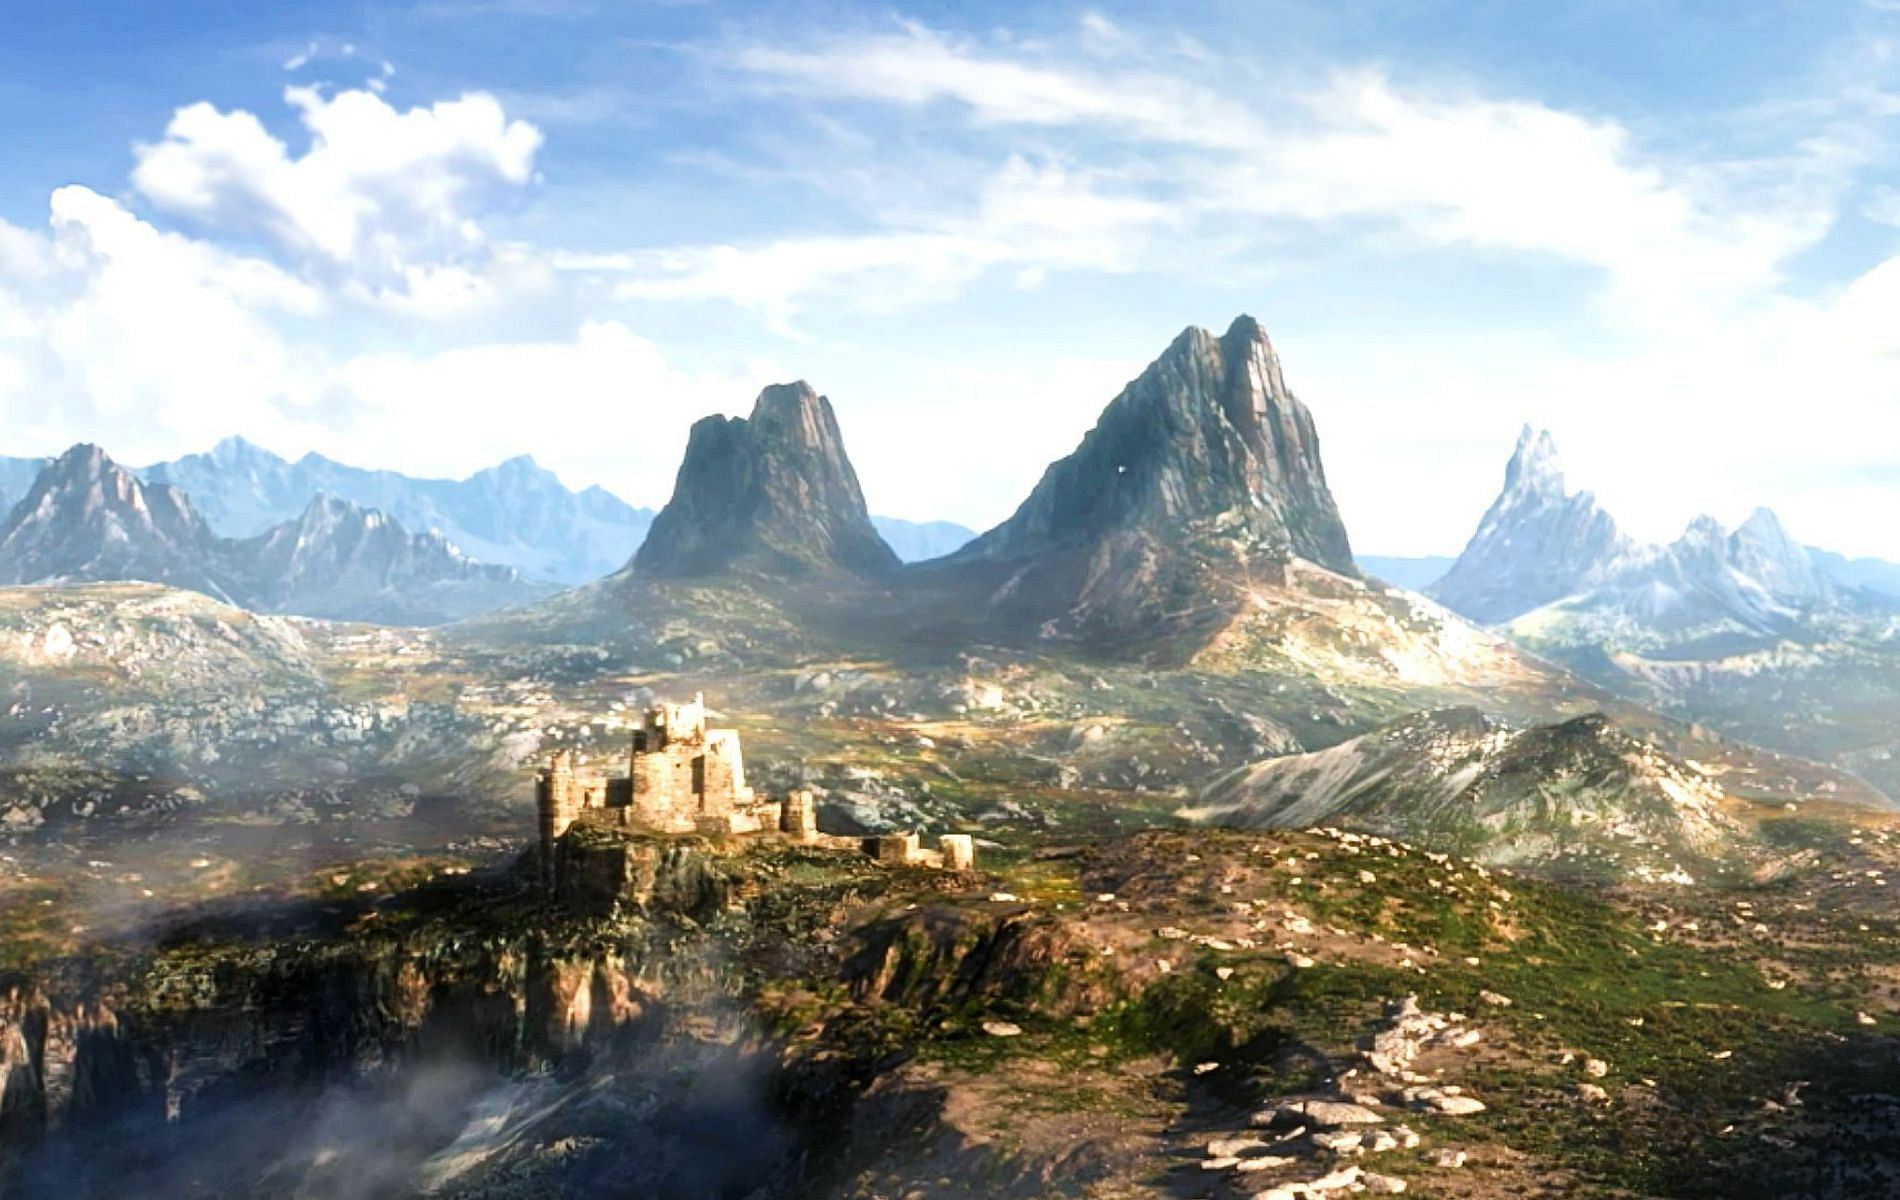 Official feature art for The Elder Scrolls 6 by Bethesda Game Studios